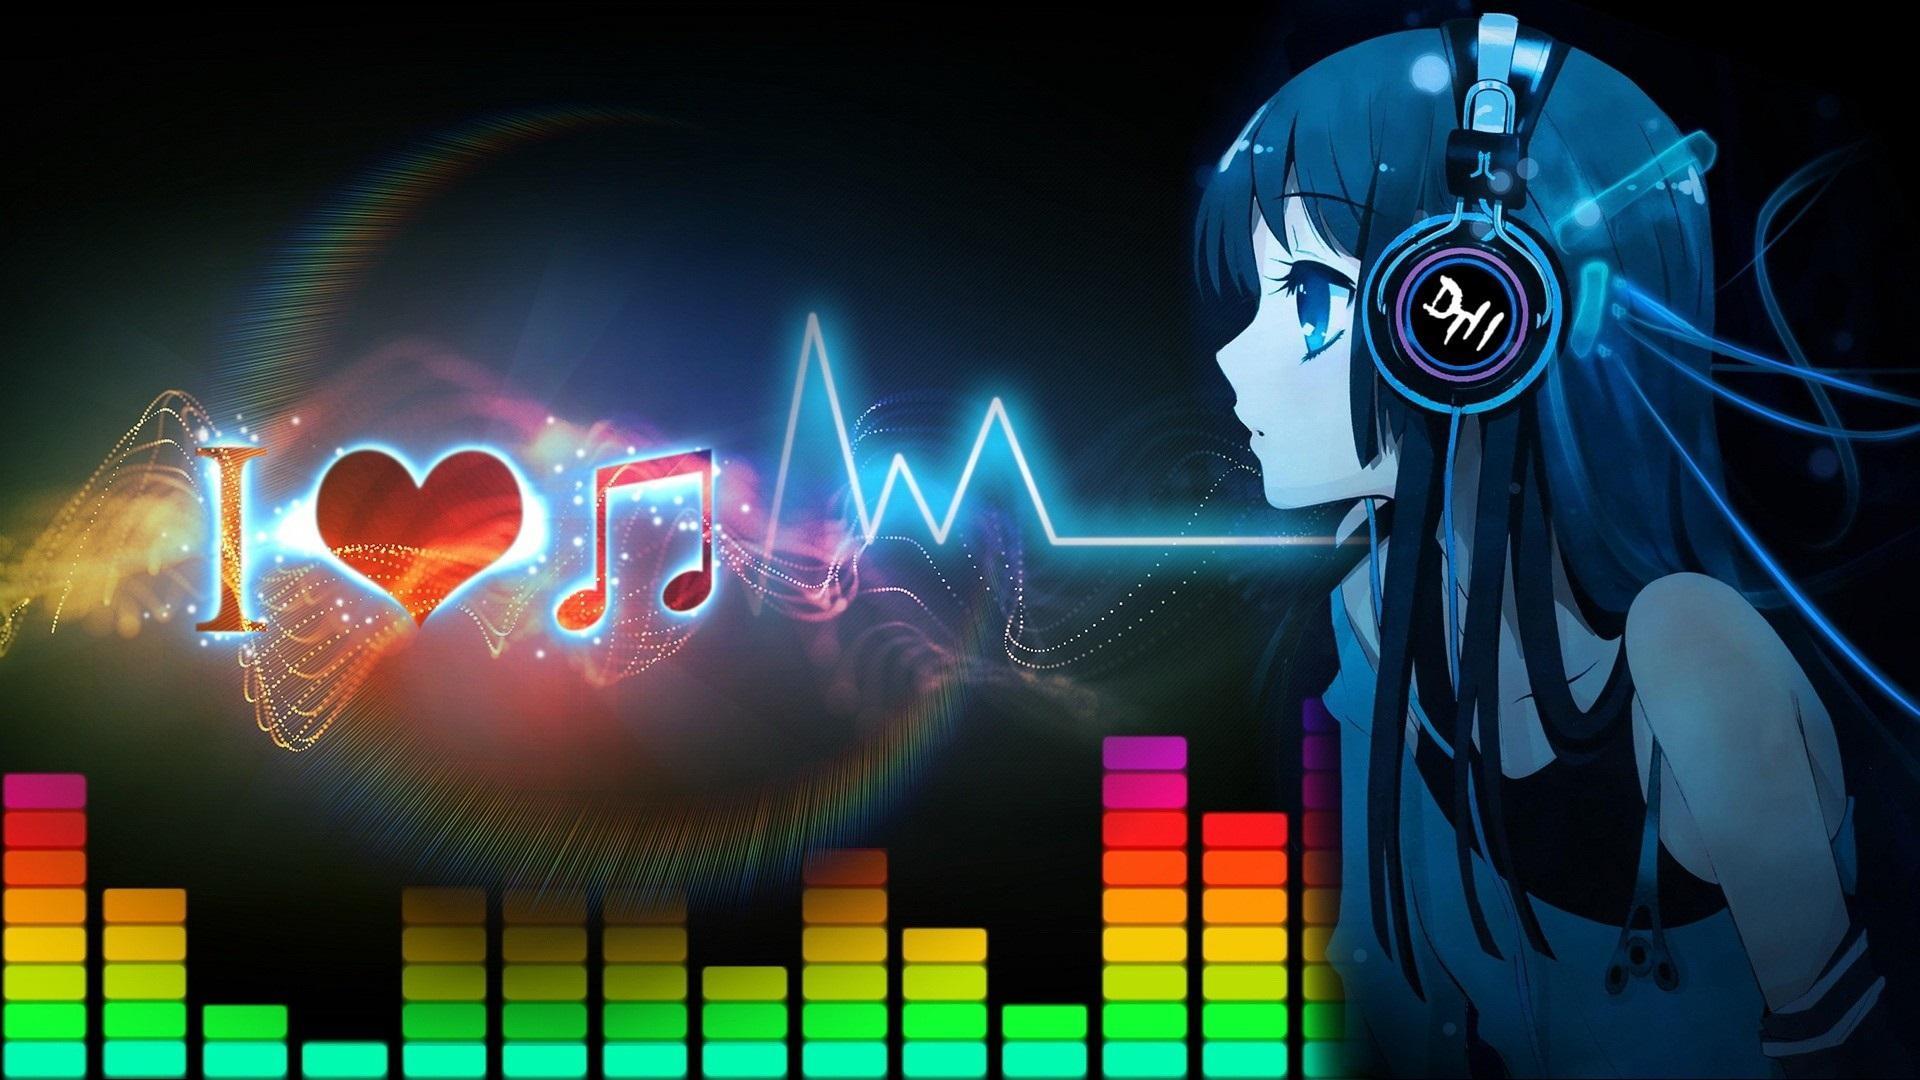 Download Girl listening to music Anime Young woman Music Headphones  Wallpaper in 1024x1024 Resolution